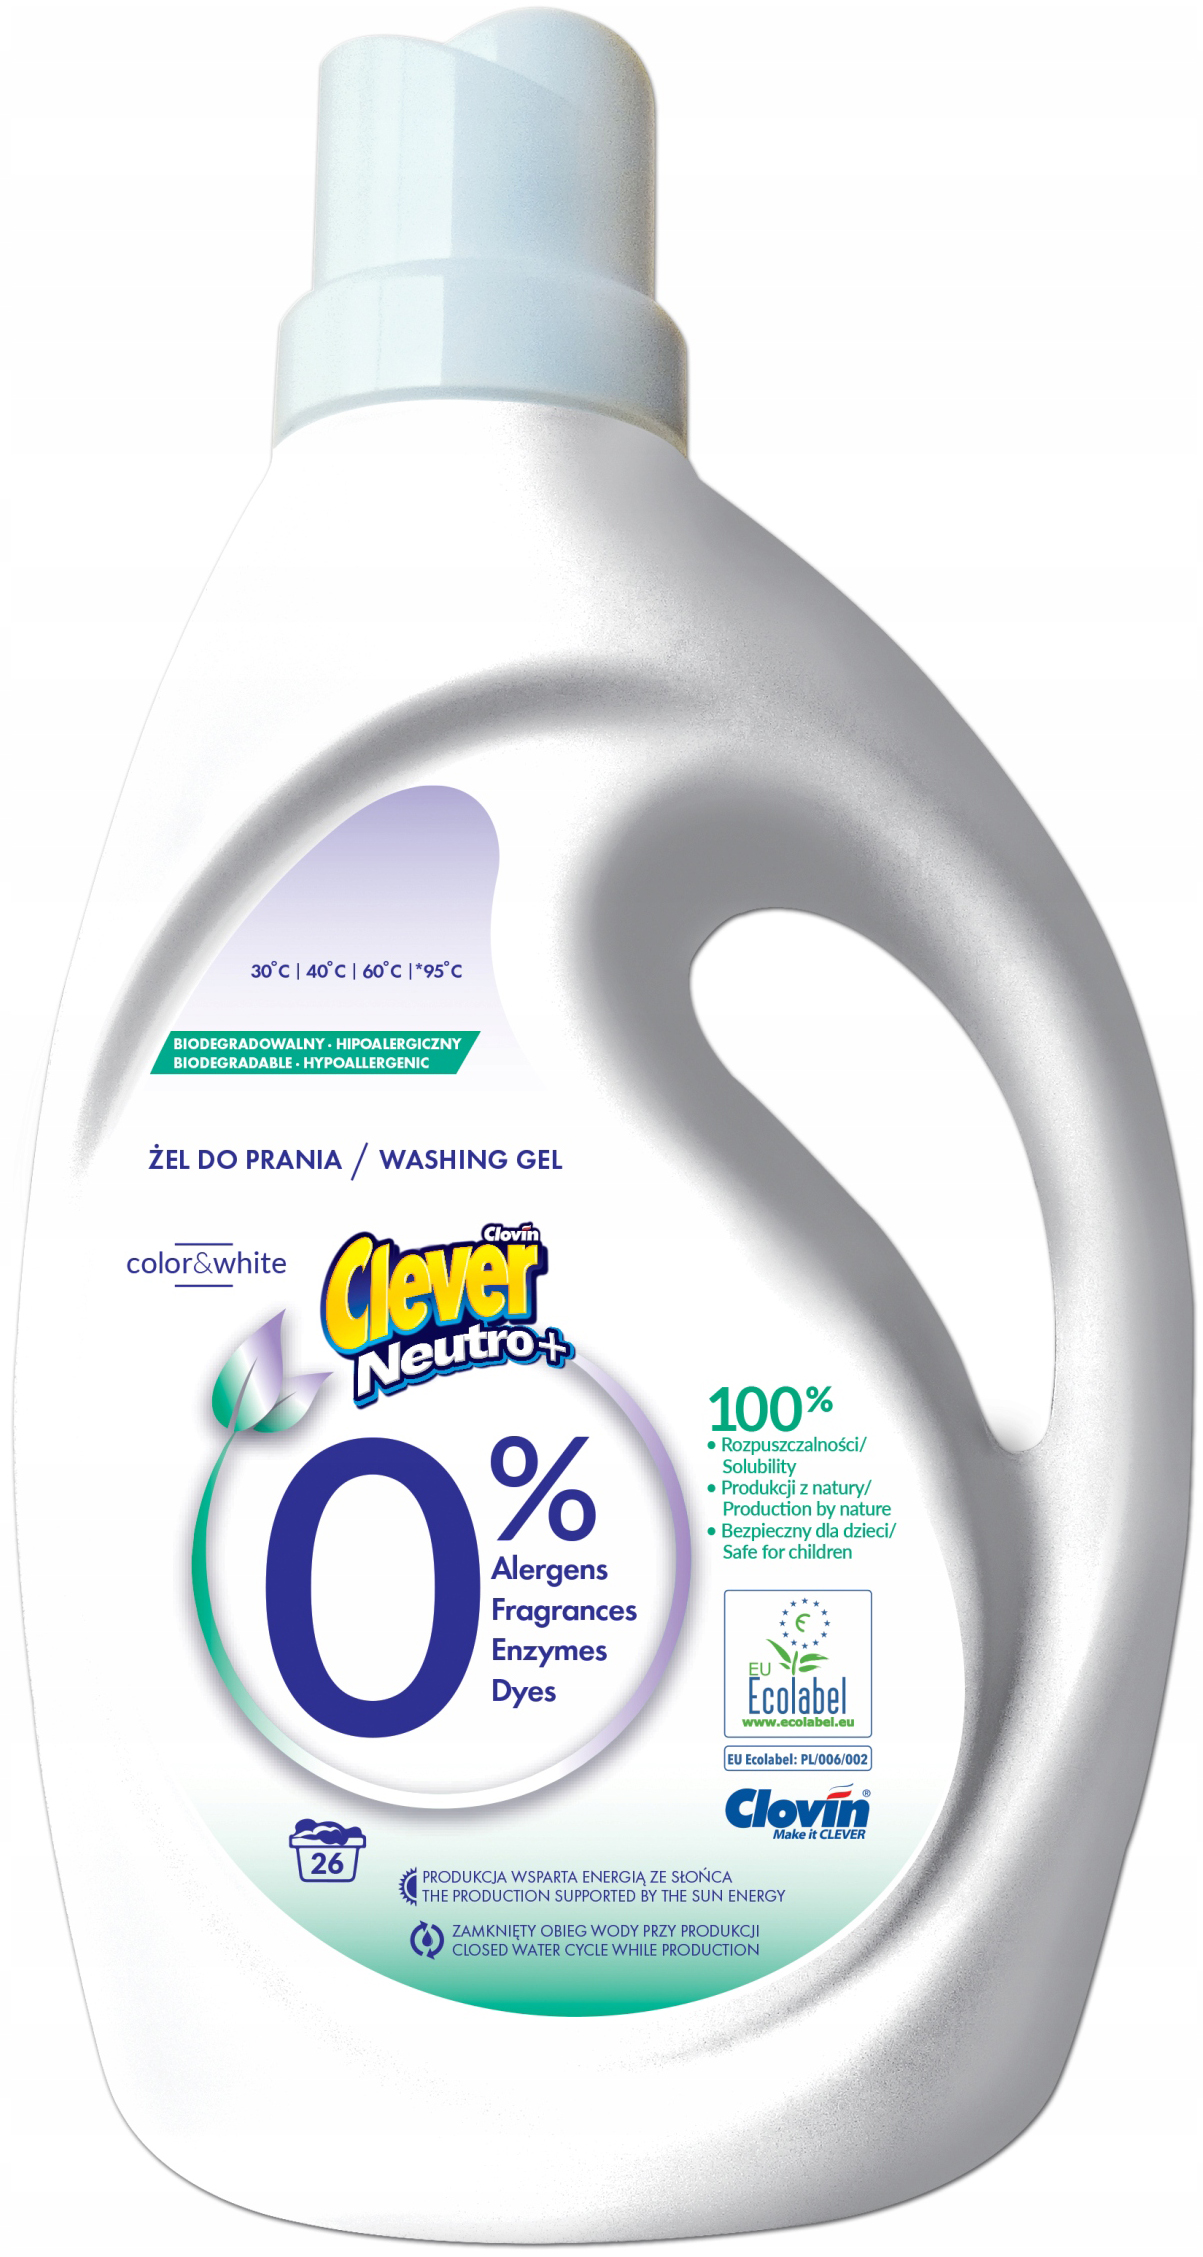 Clever Neutro+ Color & White washing gel 1.56 l